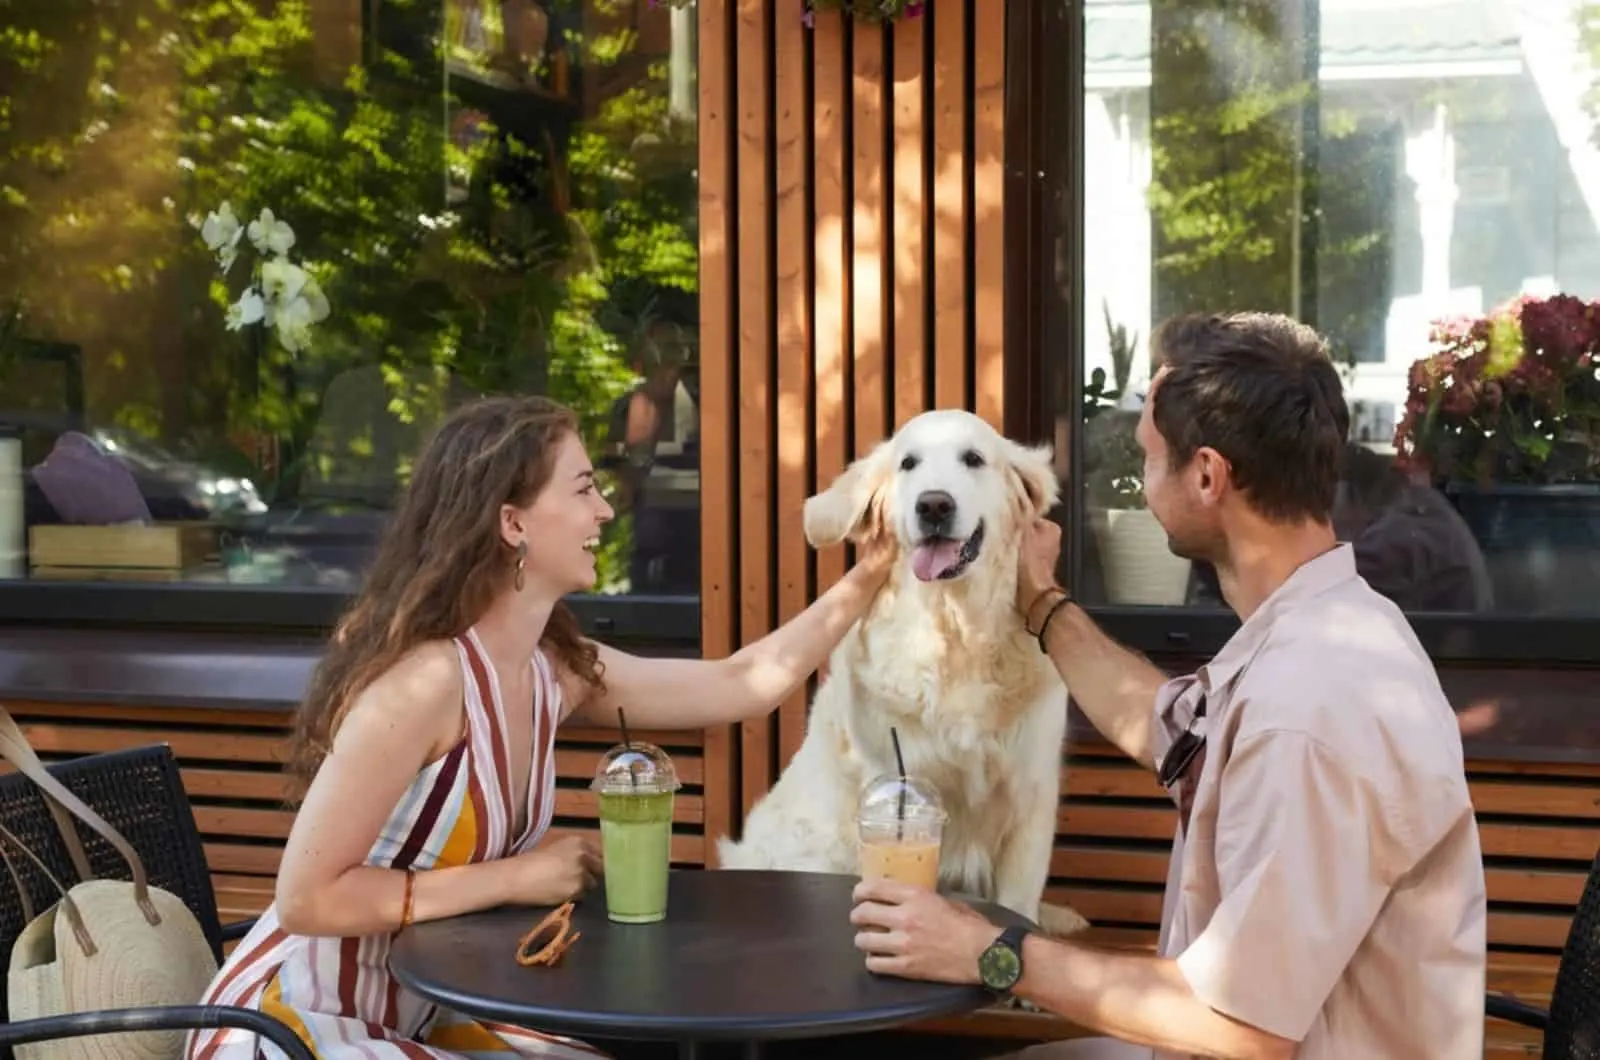 man and woman cuddling dog in outdoor cafe